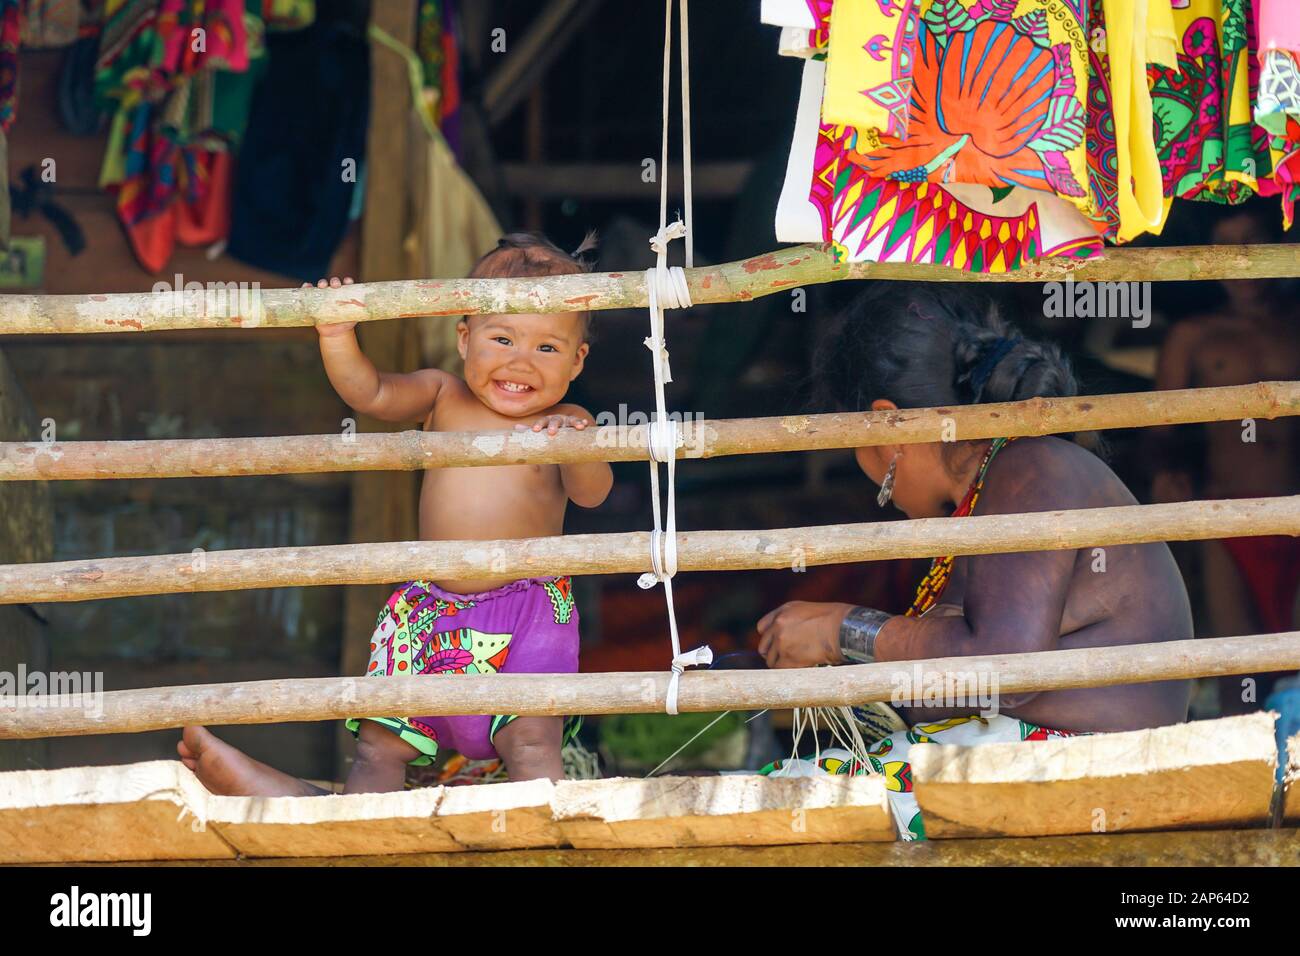 Native Embera Children playing at the Embera Puru Village in Panama, indigenous community on Alajuela Lake in the Chagres National Park Stock Photo